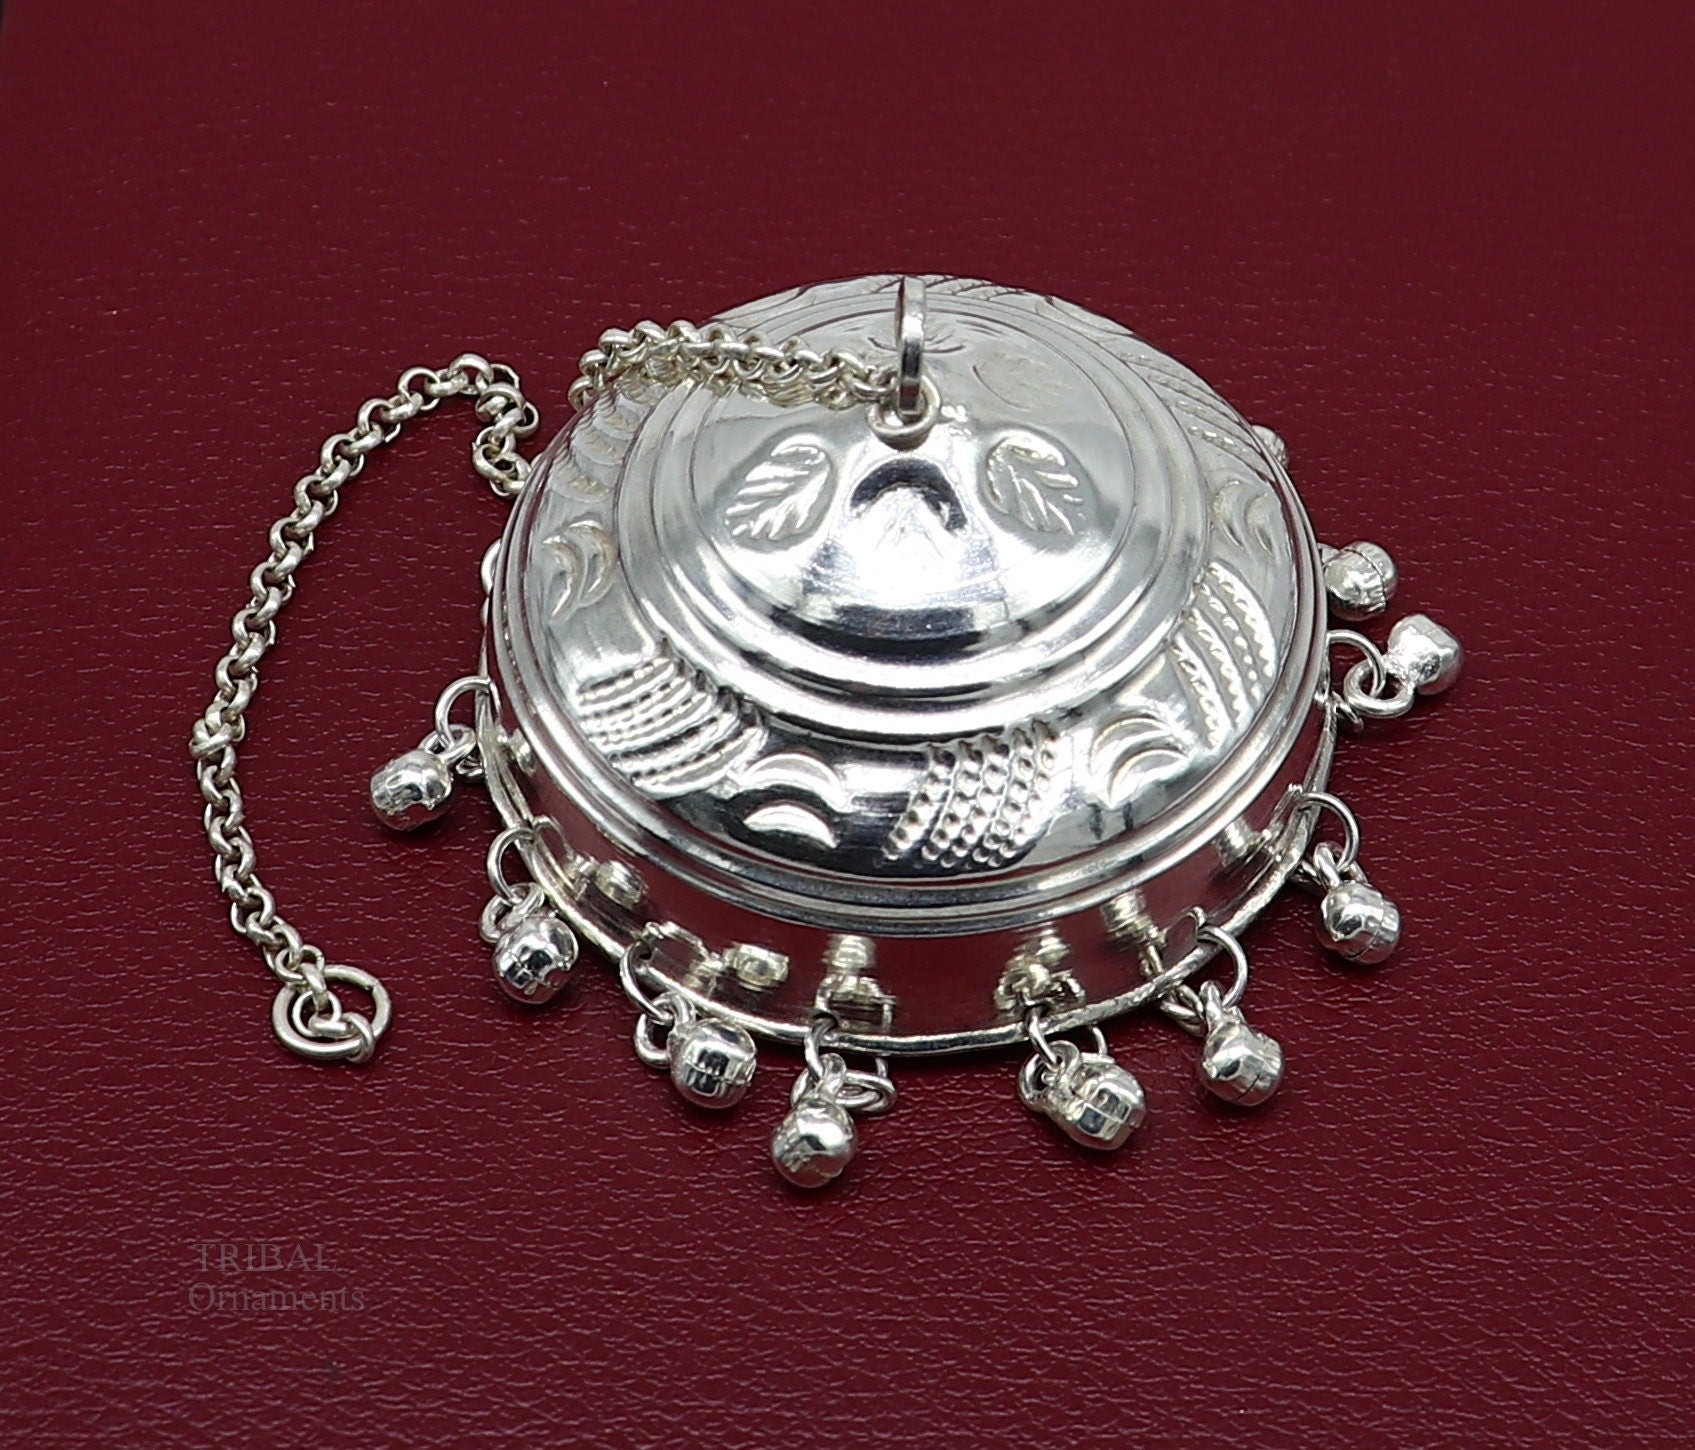 Solid Silver chattar or chhatra, silver umbrella god temple art, Gorgeous  hand craved Solid silver temple article, temple utensils su628 - TRIBAL ORNAMENTS